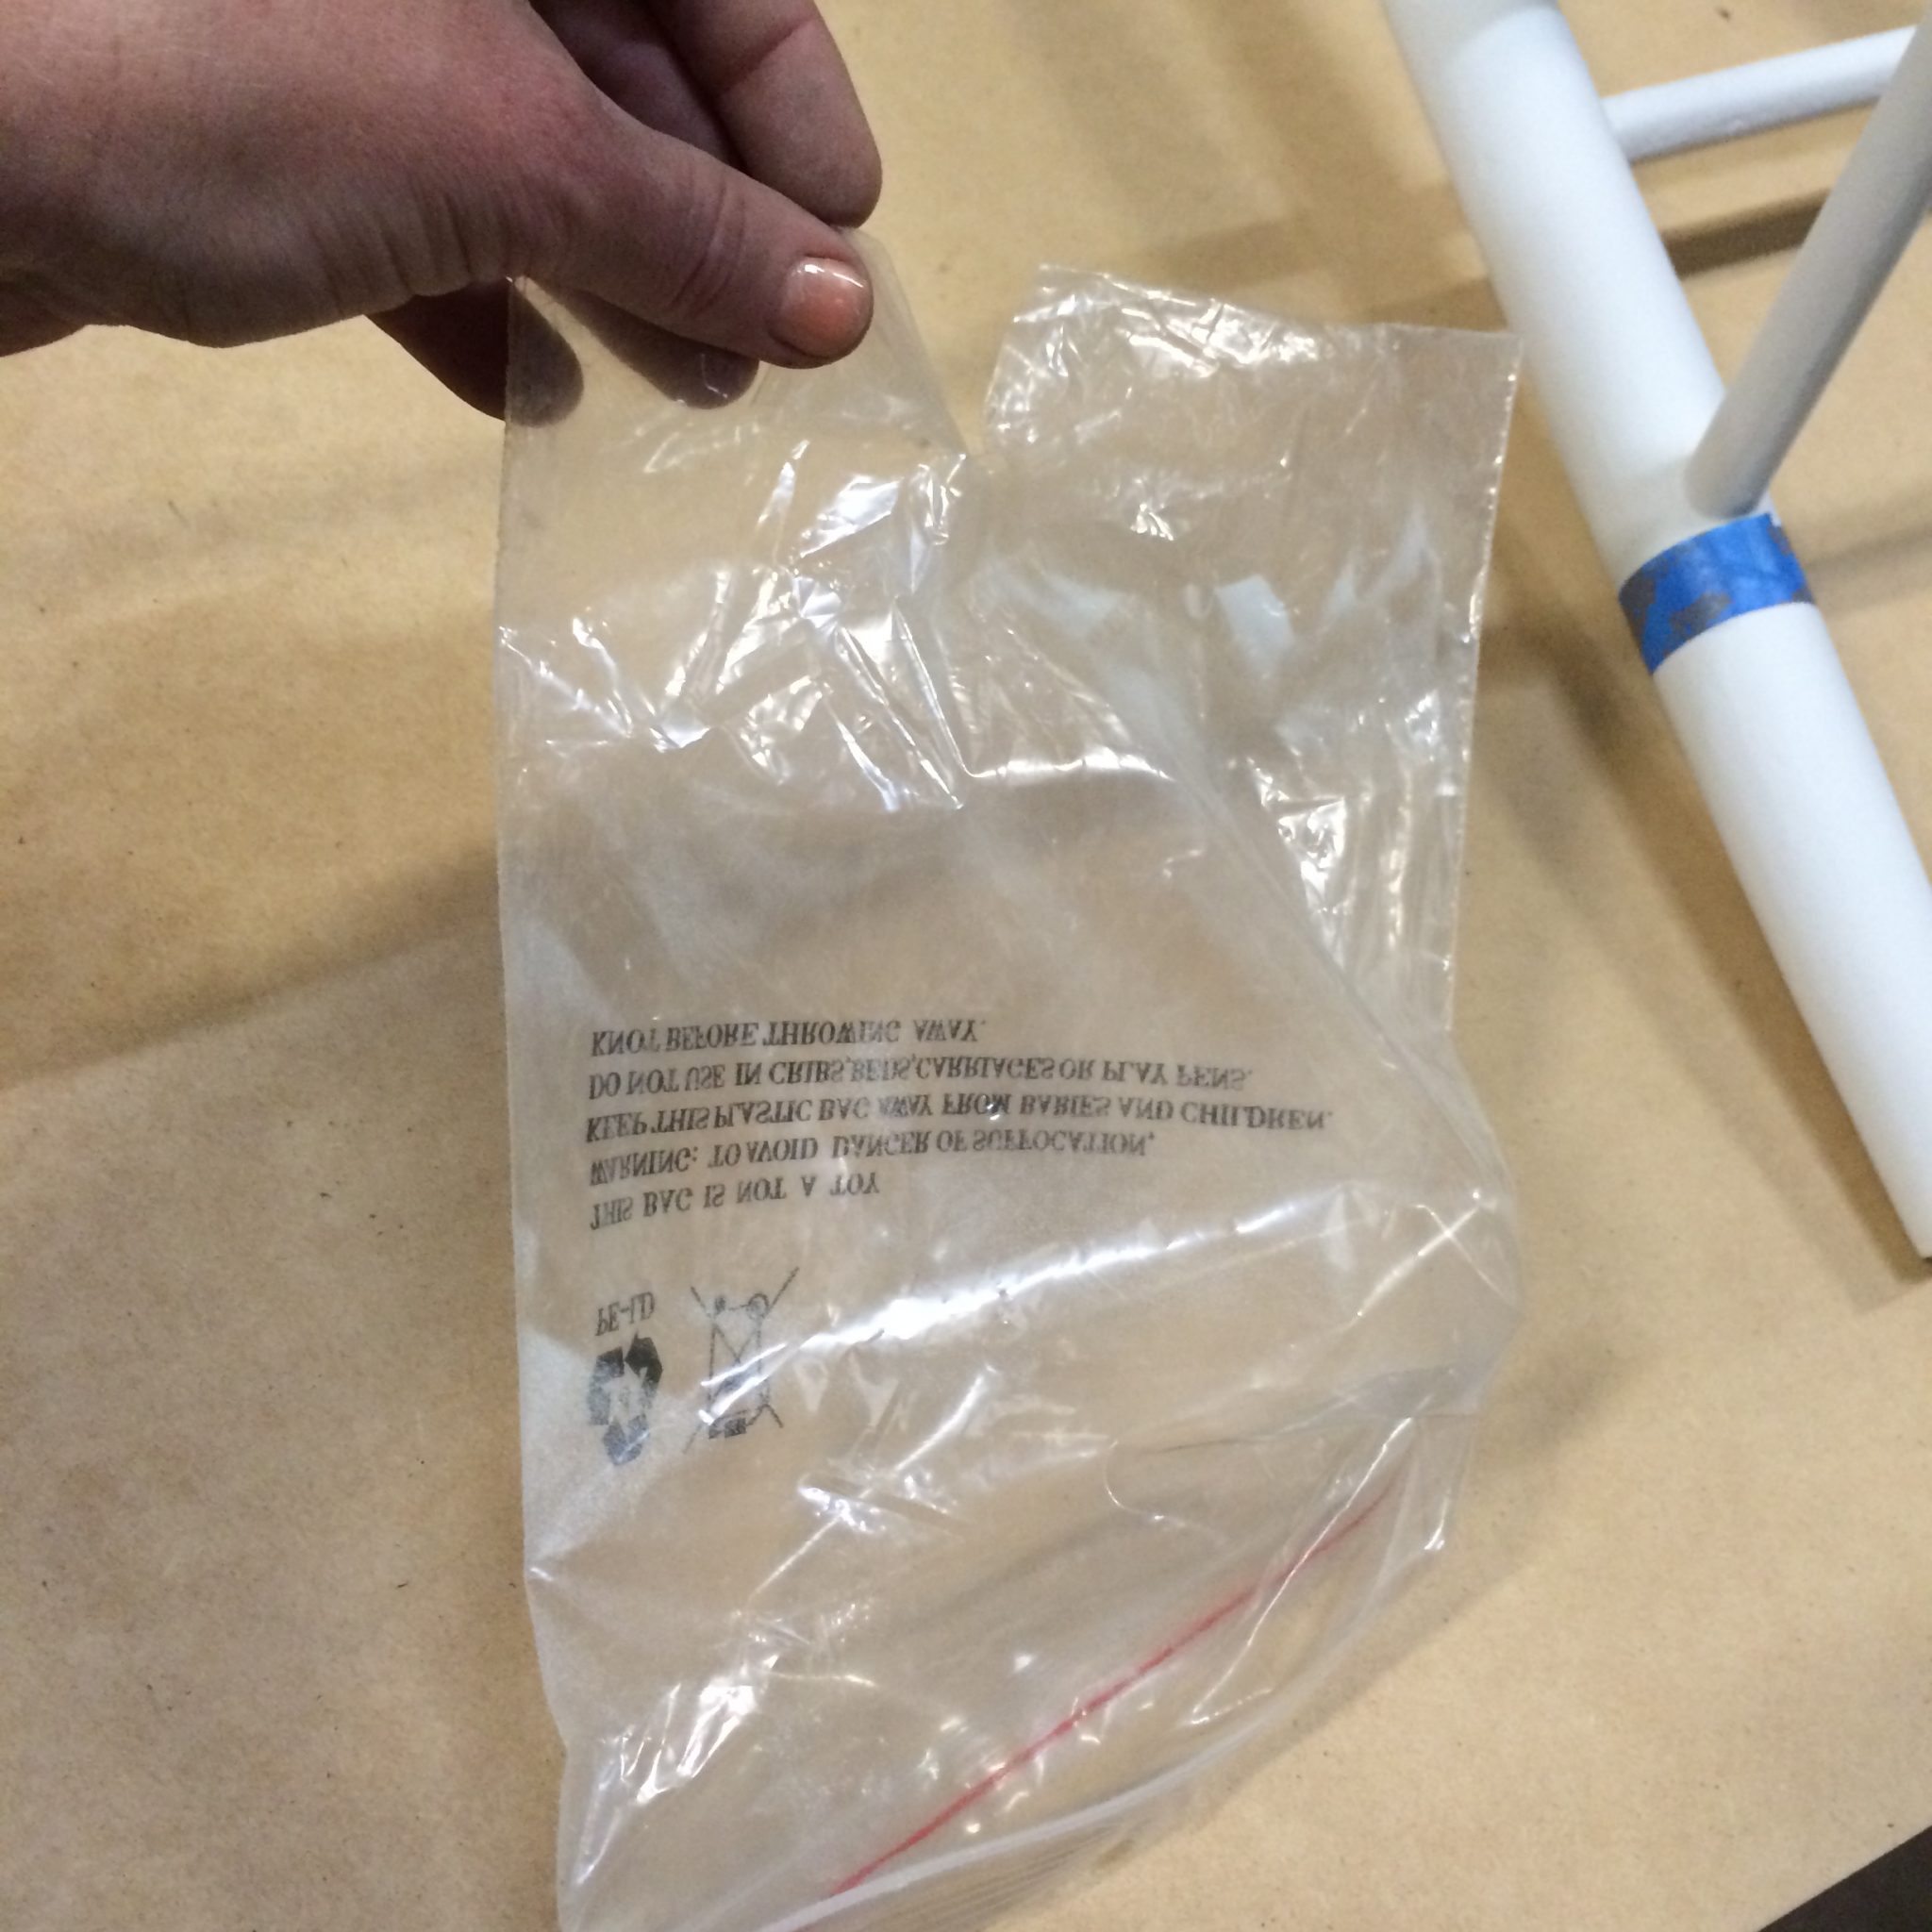  9 recycle small bags by cutting a hole for a leg to go through and use masking tape to secure